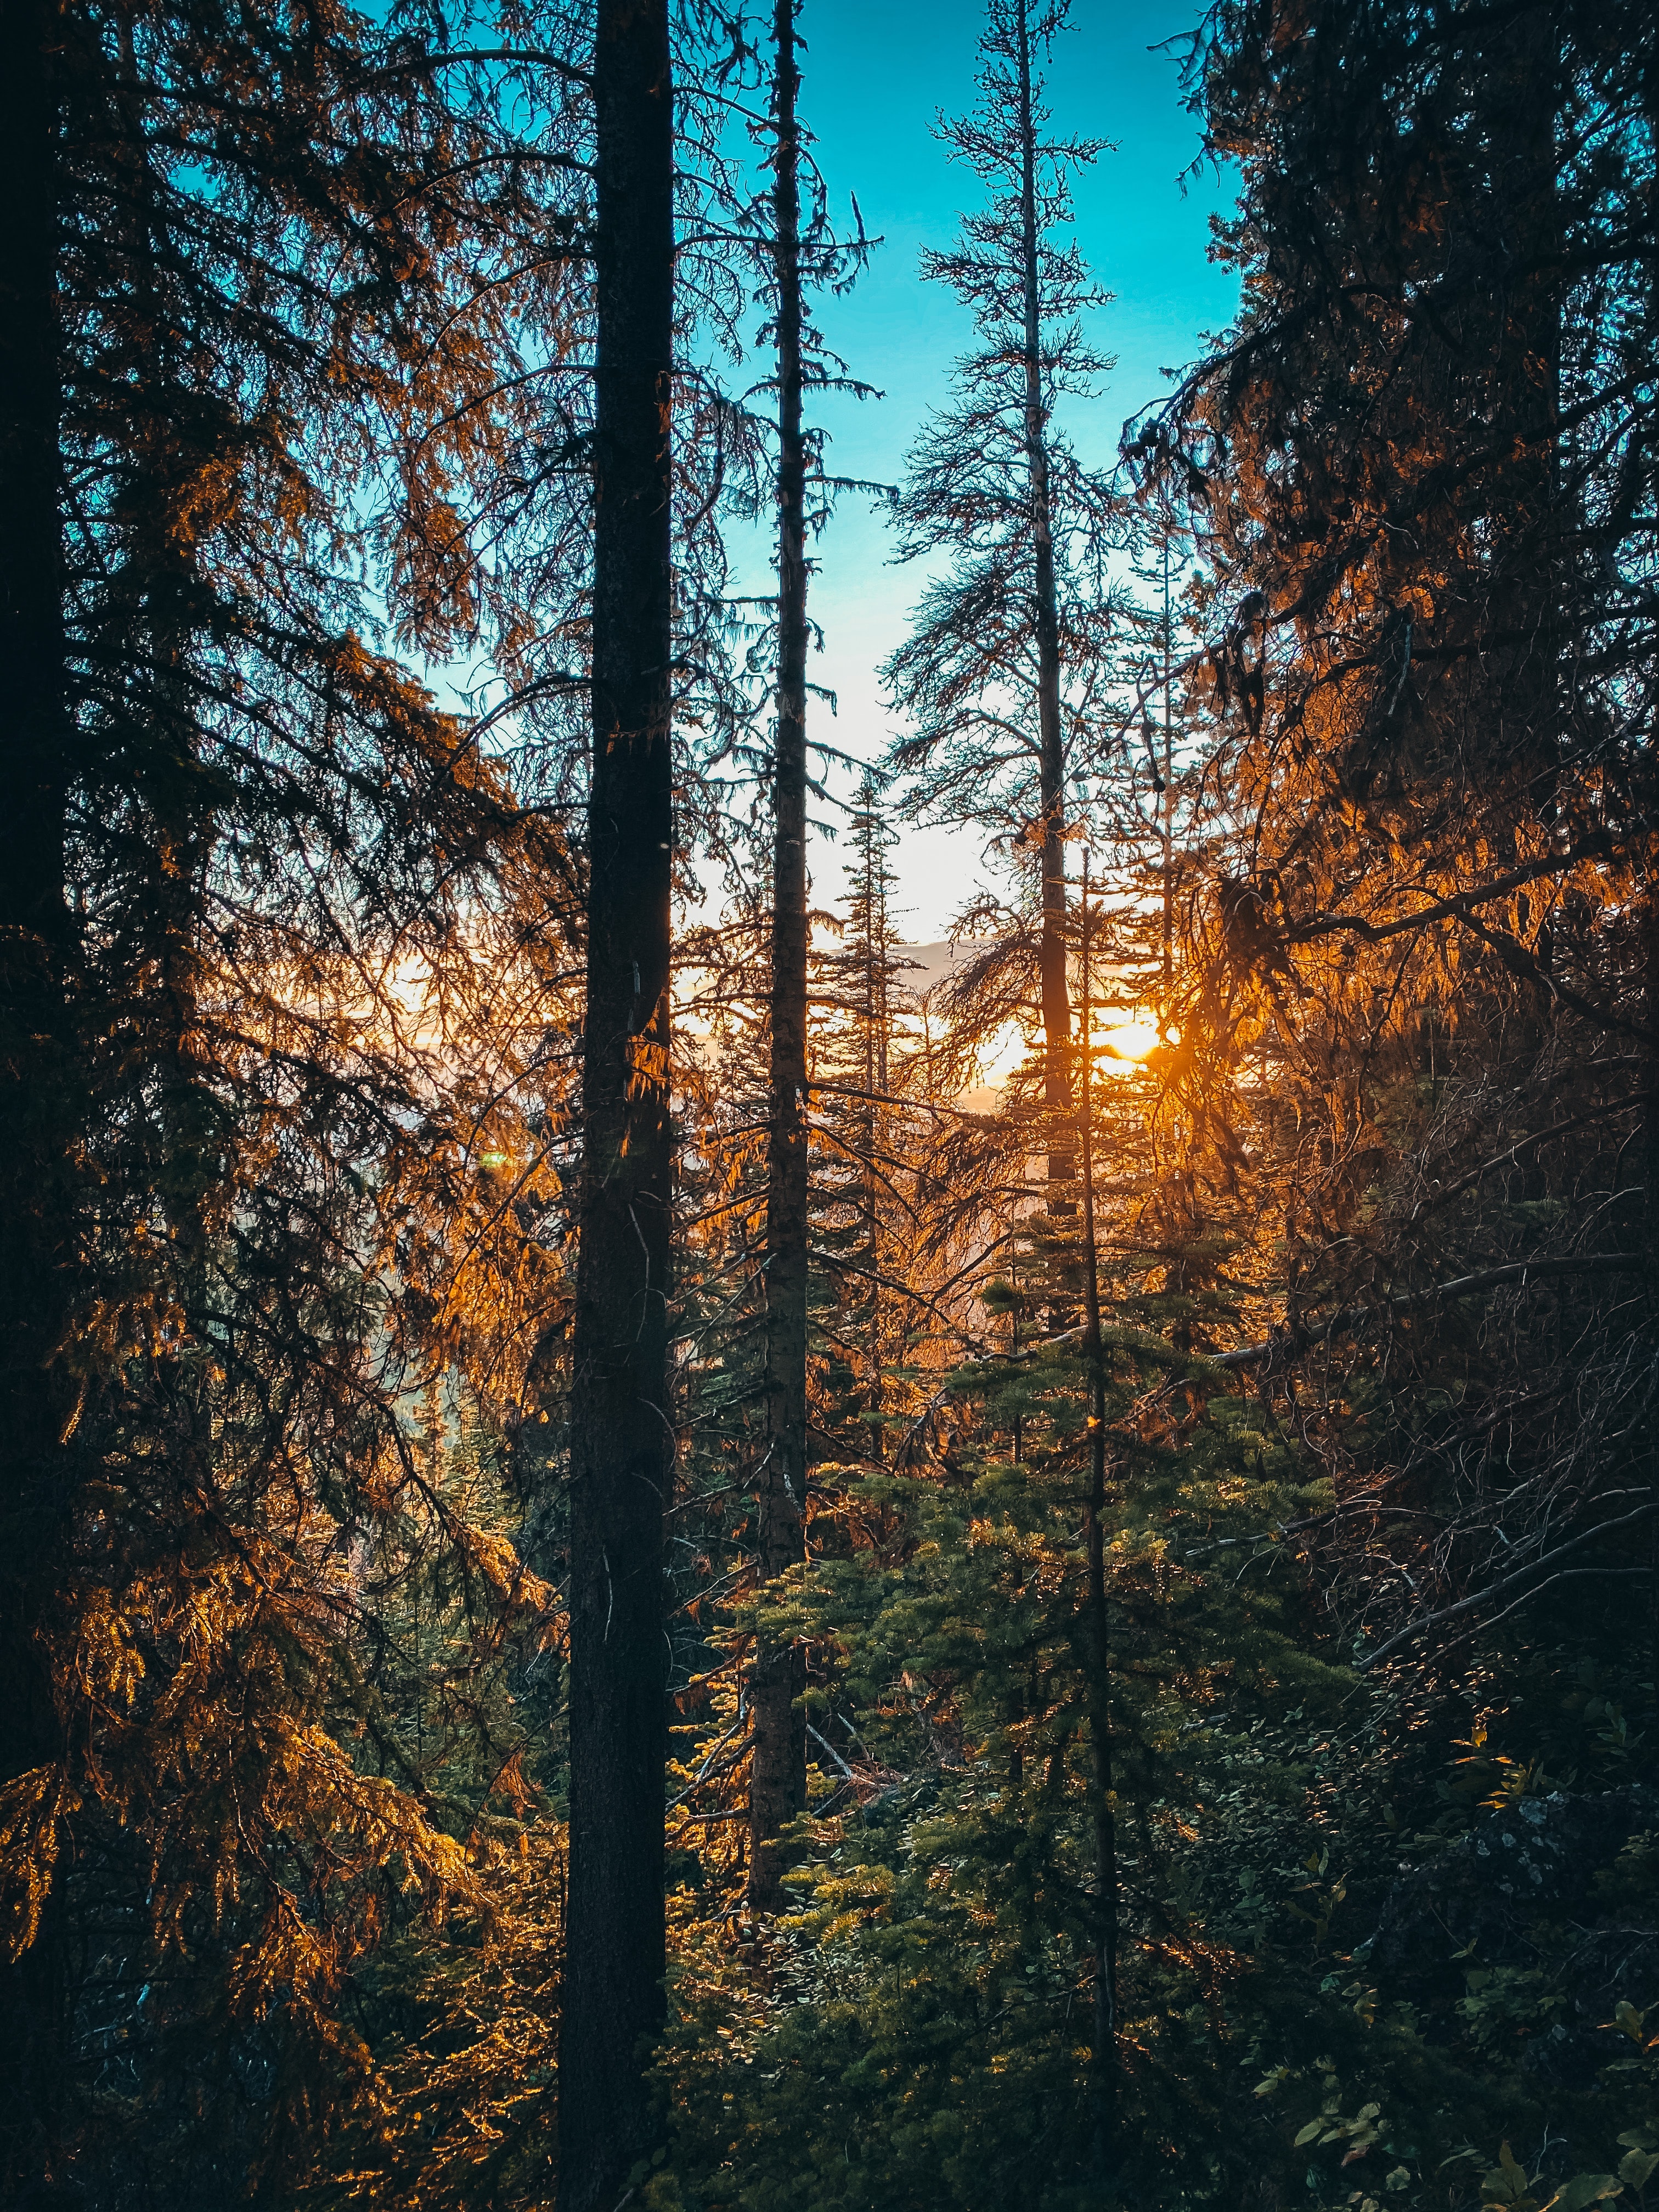 desktop Images nature, forest, sun, beams, rays, branches, spruce, fir